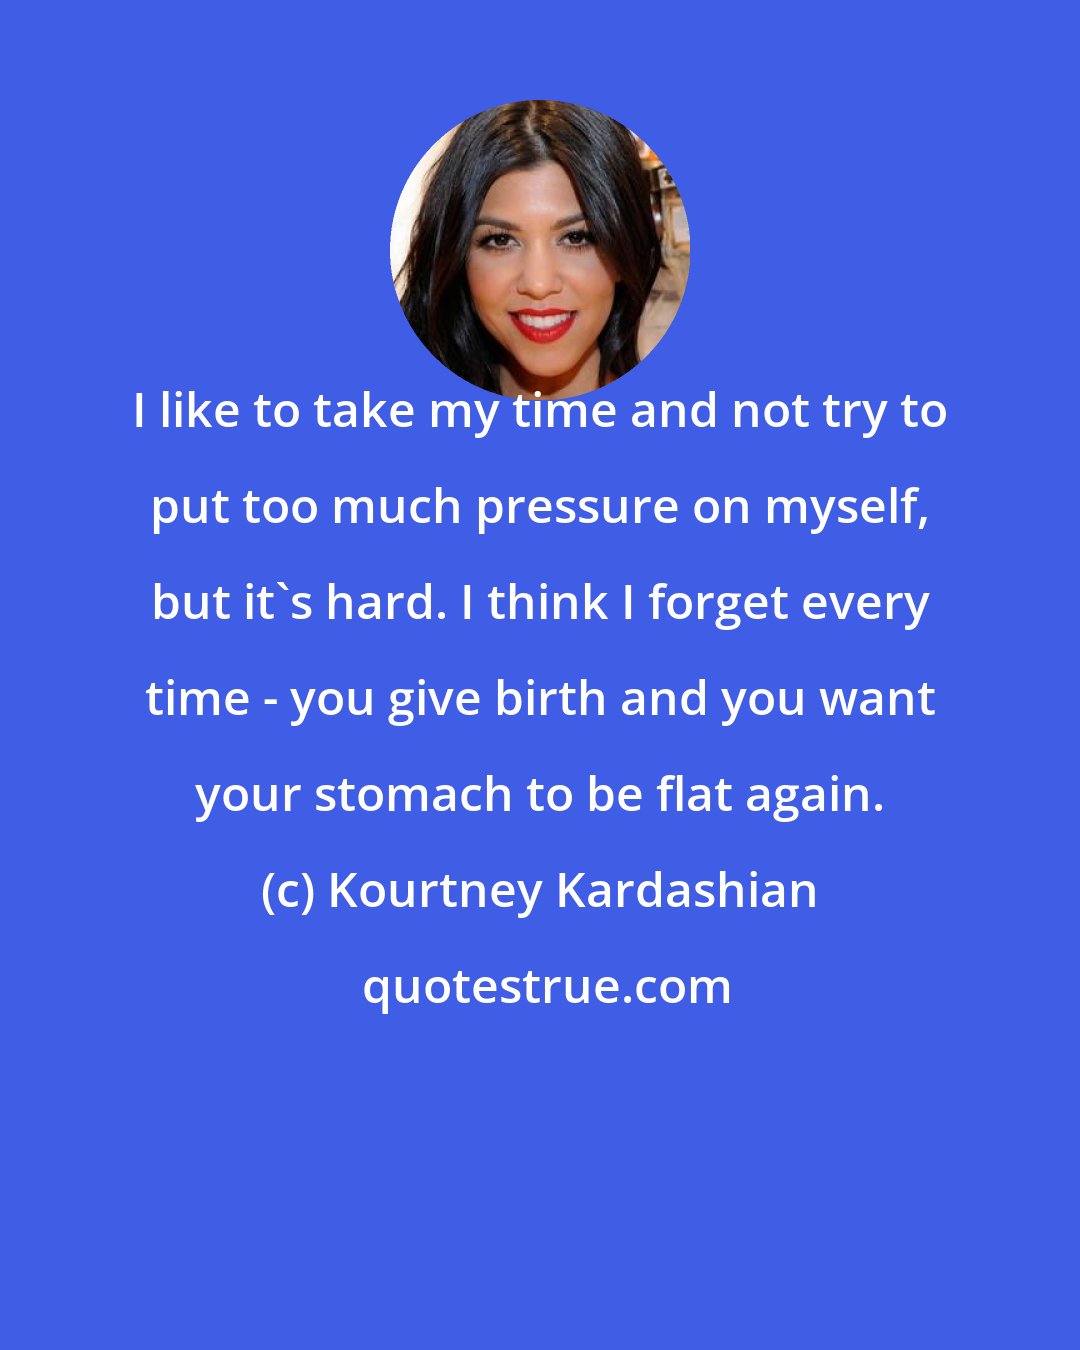 Kourtney Kardashian: I like to take my time and not try to put too much pressure on myself, but it's hard. I think I forget every time - you give birth and you want your stomach to be flat again.